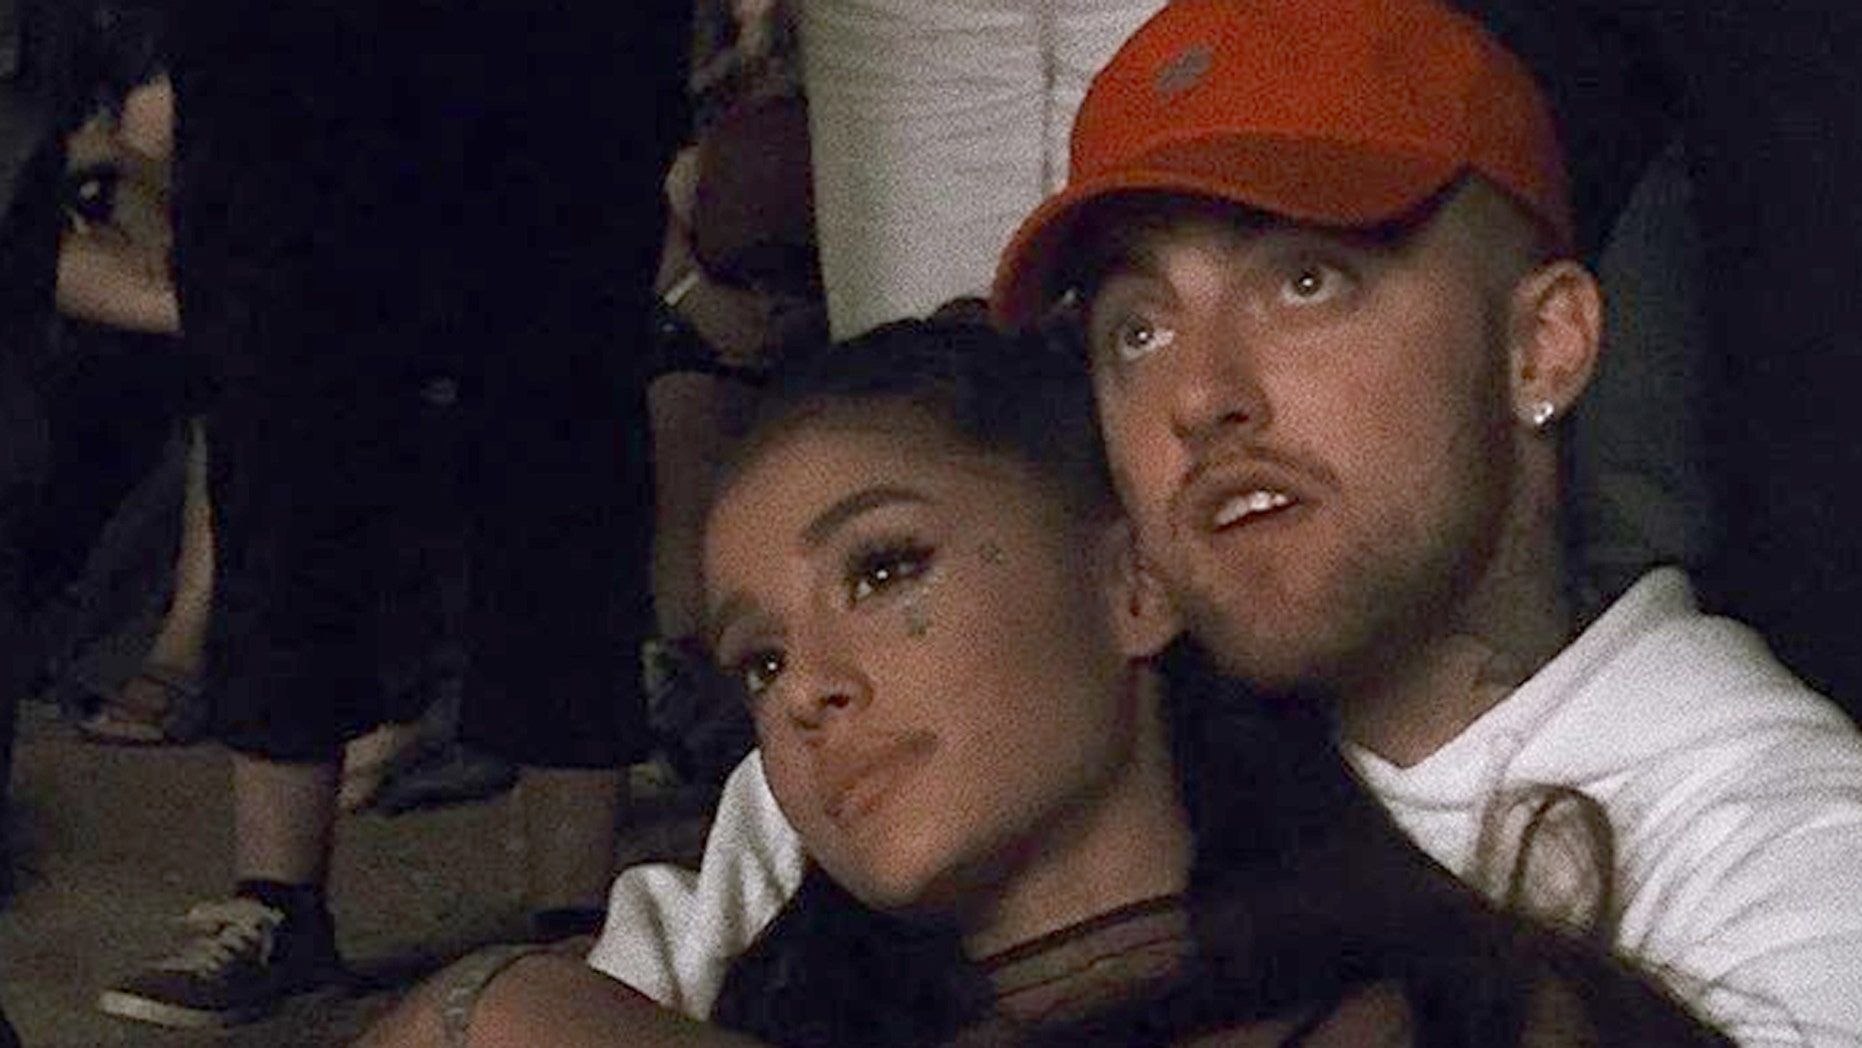 how long were mac and ariana together